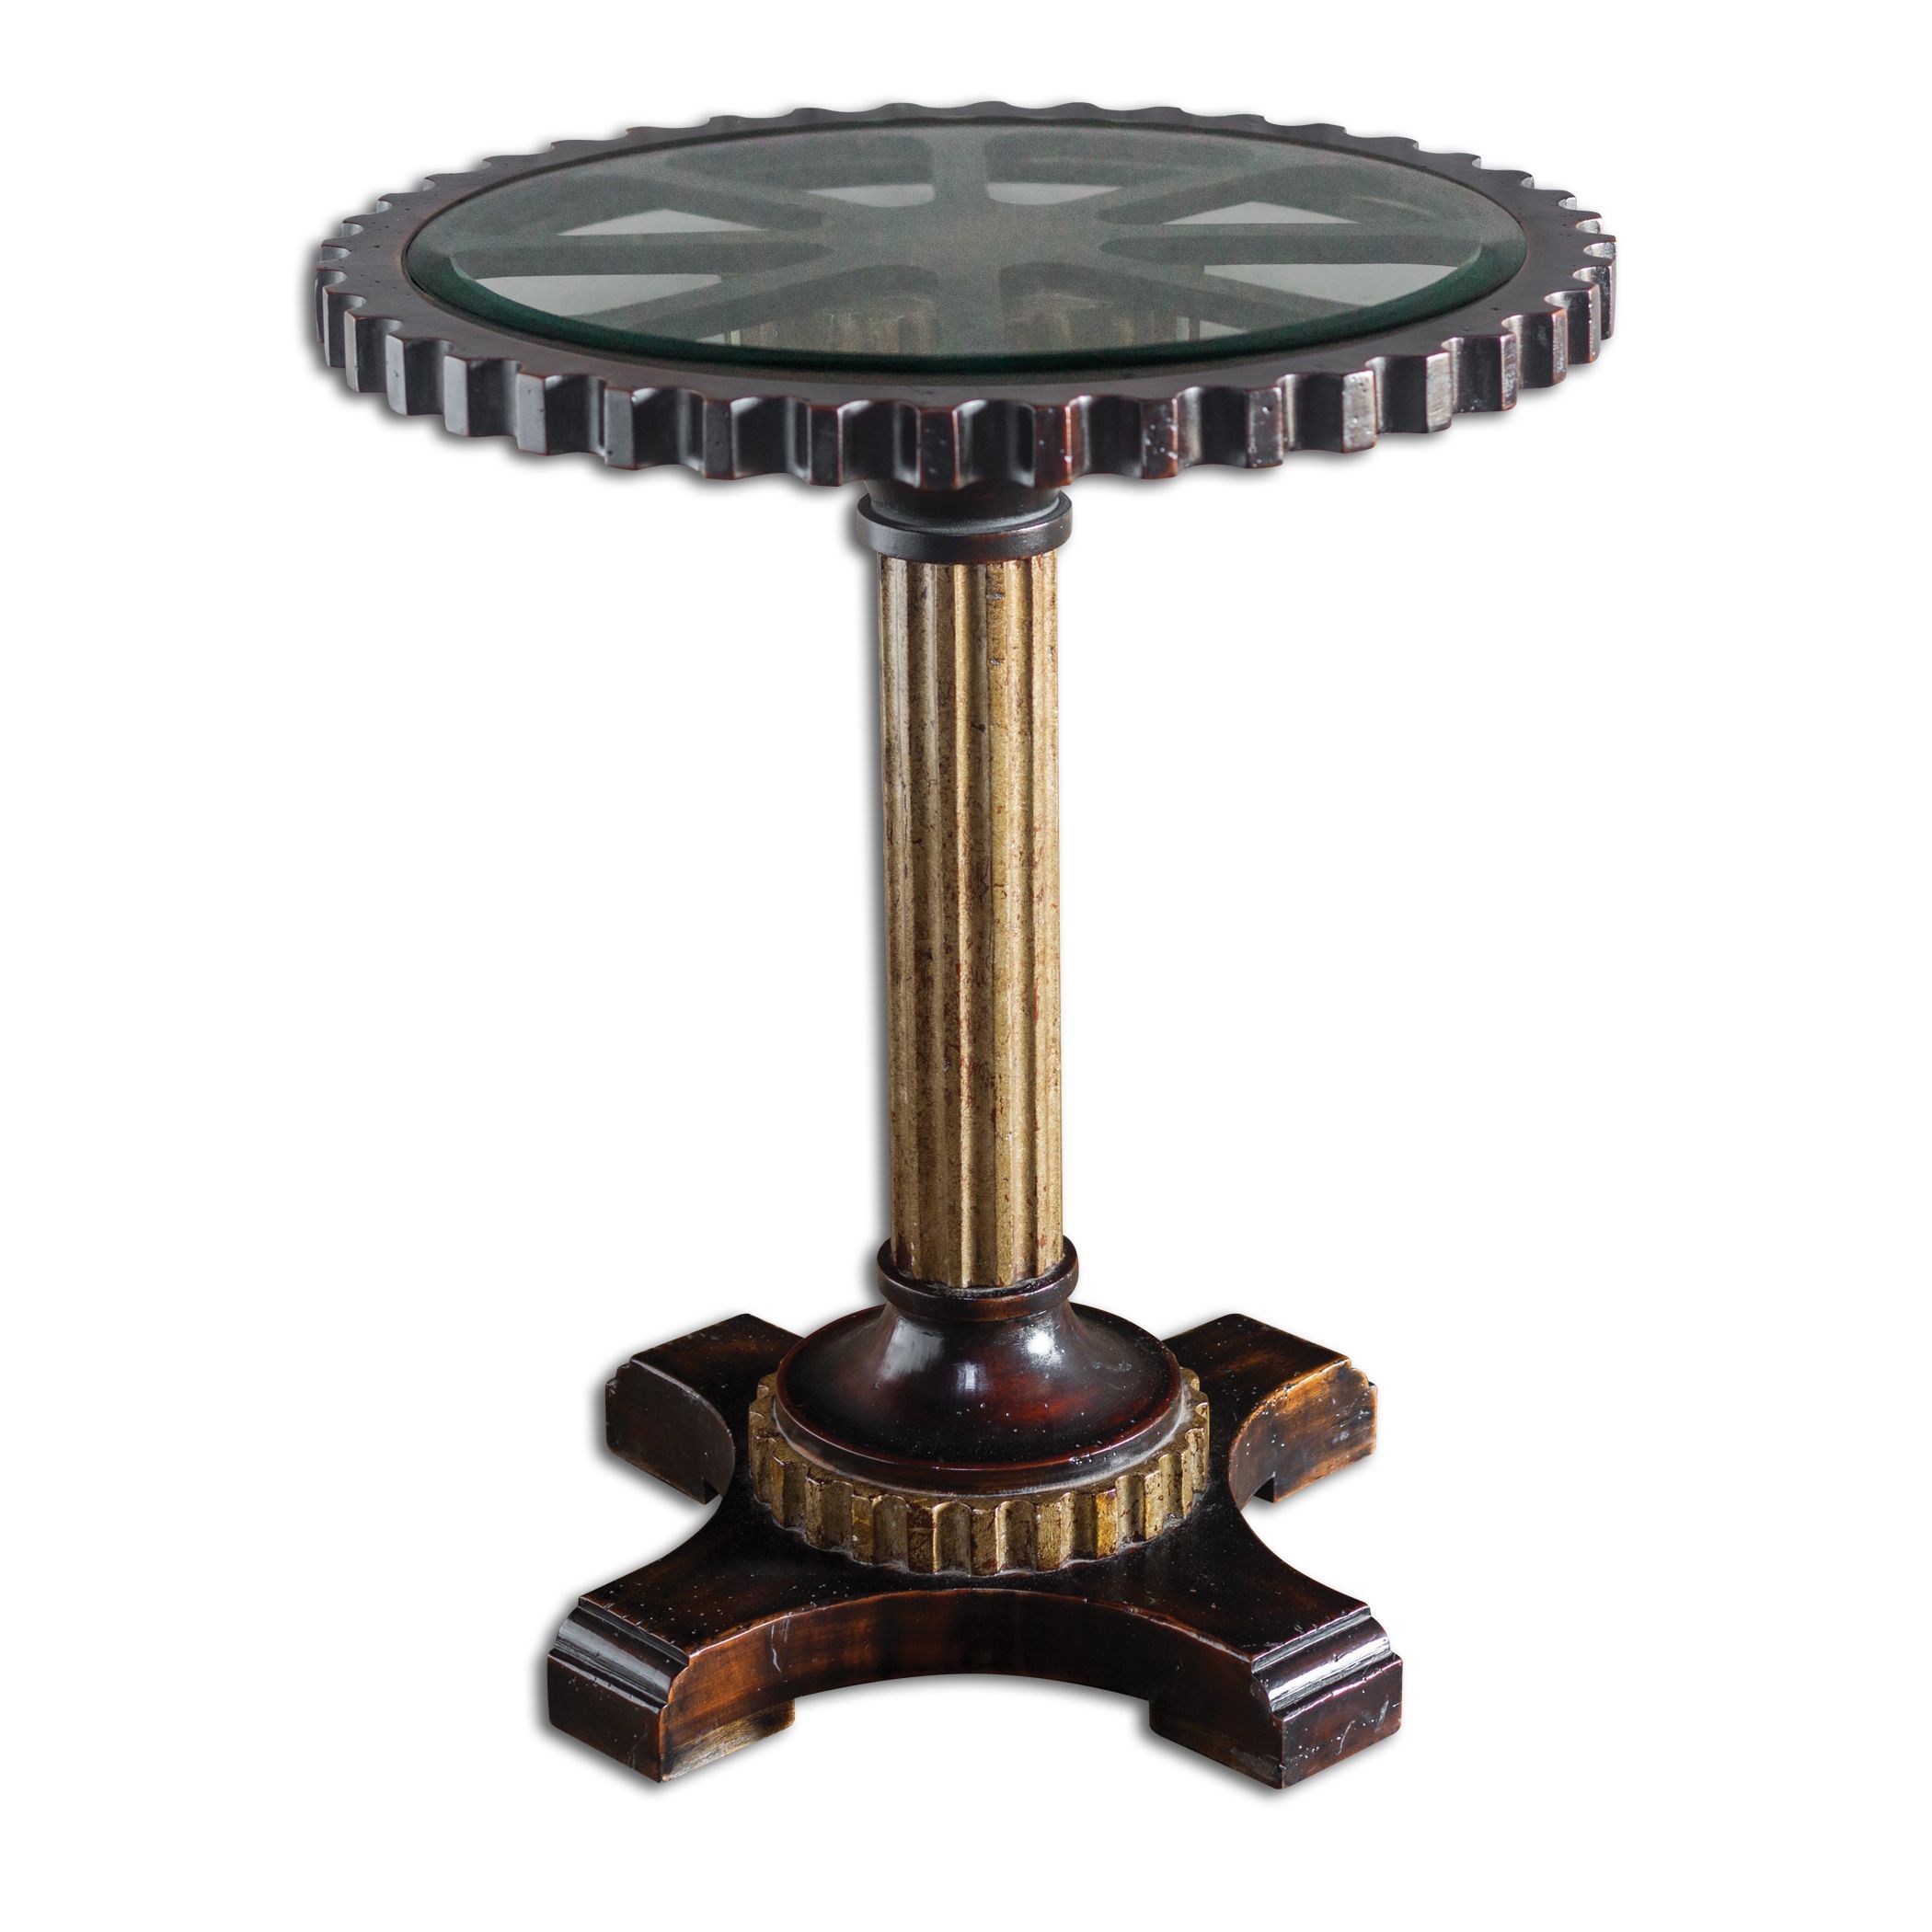 uttermost nekoda wooden accent table victorian style white and walnut coffee round pedestal side circle marble outdoor top bedroom wall clock dale tiffany butterfly lamp pottery